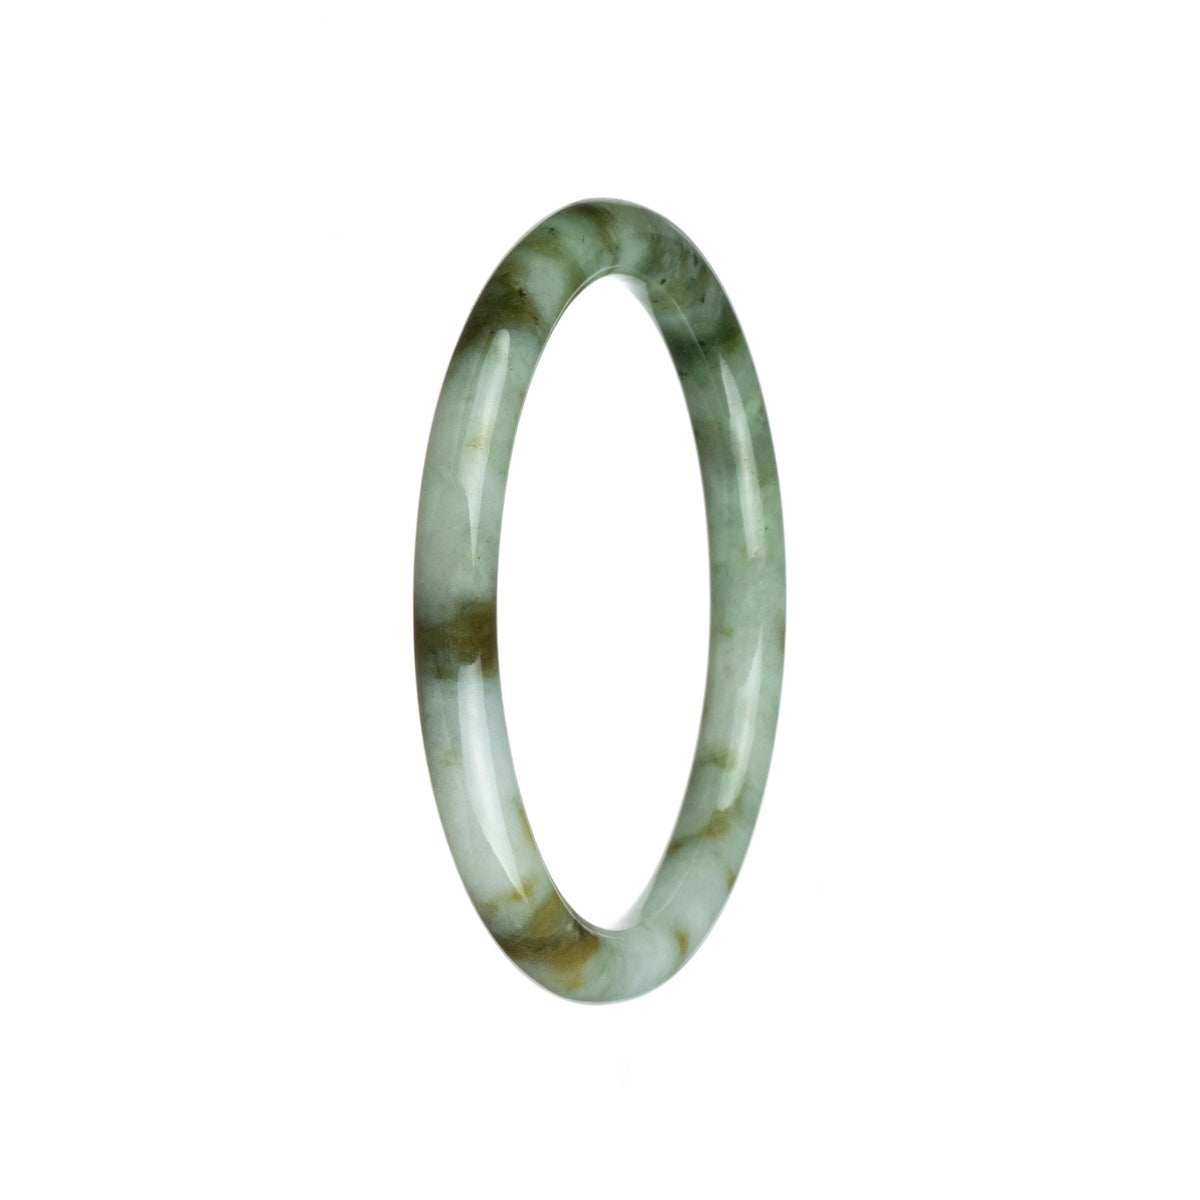 A small round jade bangle bracelet with a beautiful green, white, and brown pattern. Perfect for adding a touch of elegance to any outfit.